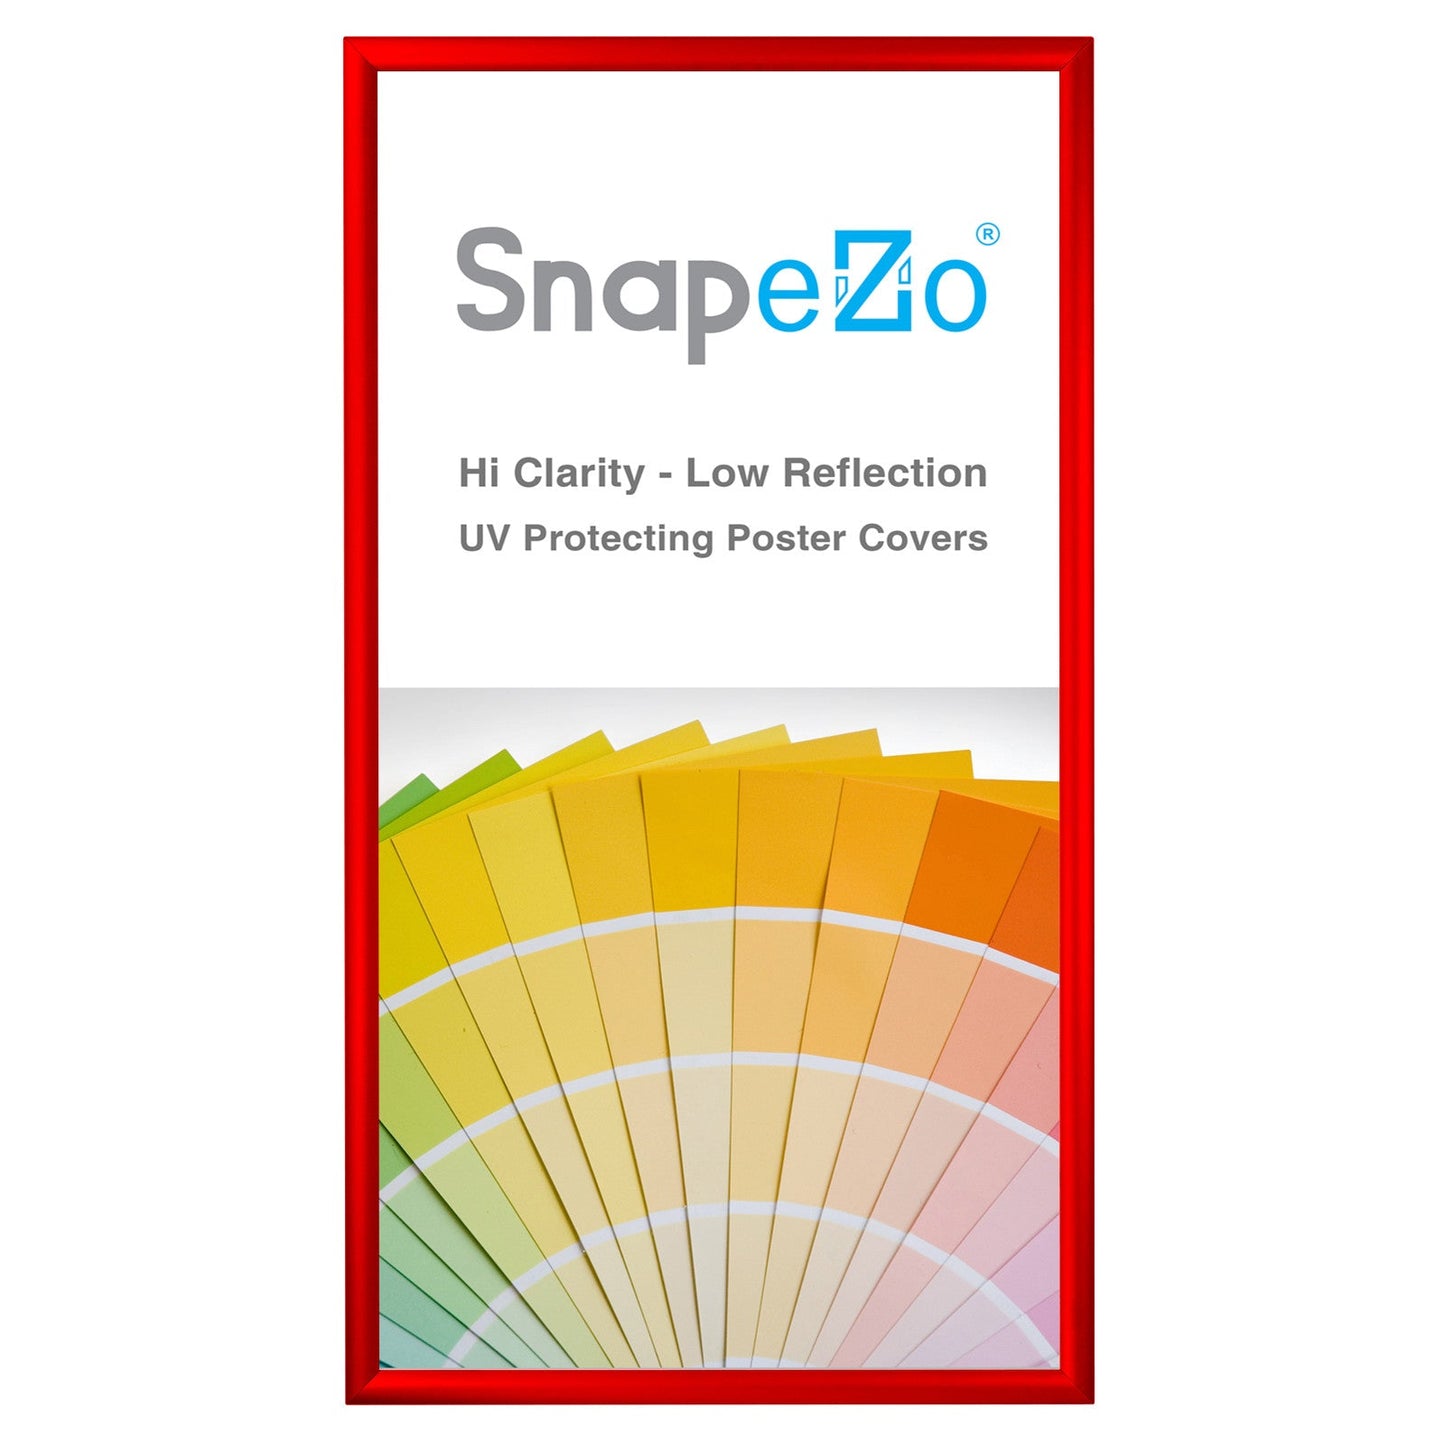 18x36 Red SnapeZo® Snap Frame - 1.2" Profile